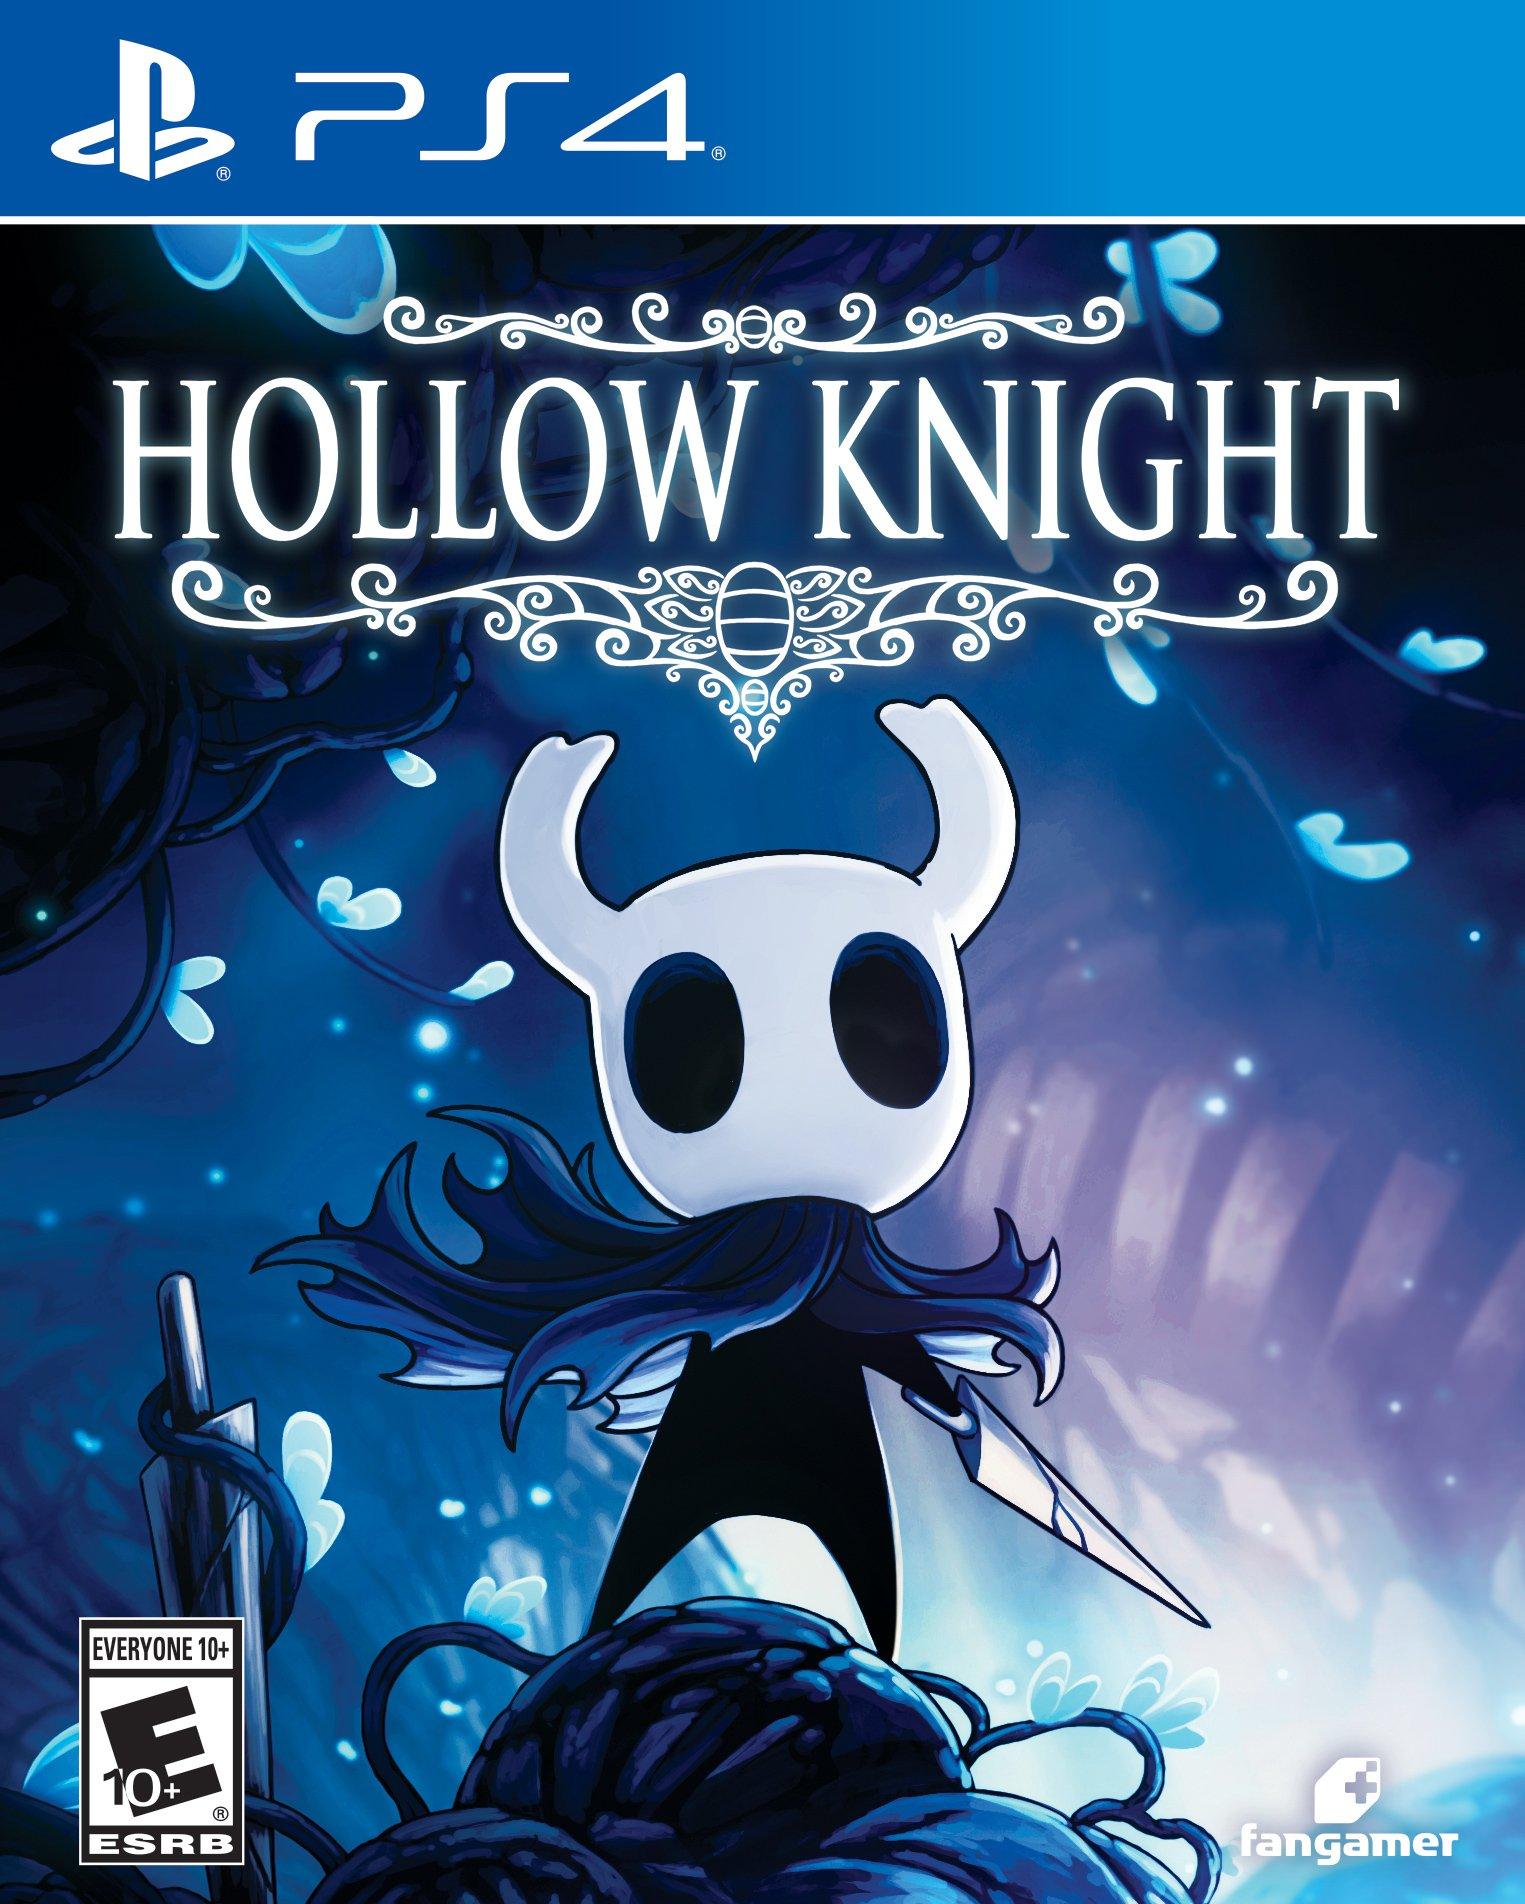 Hollow Knight Coming To PS4 And Xbox One Later This Month - Game Informer